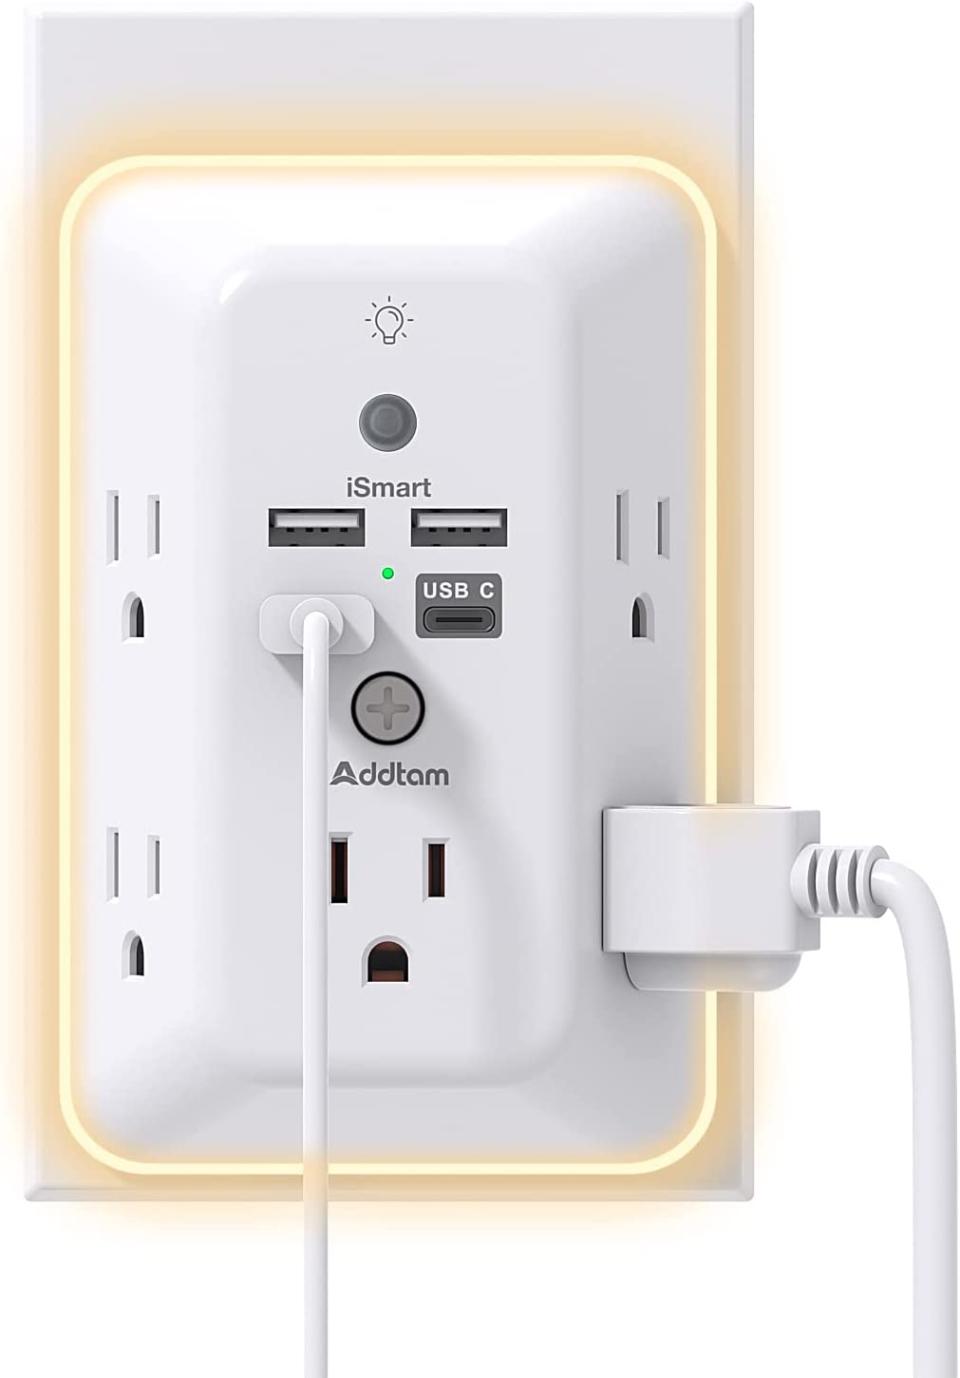 The Best Deals on Surge Protectors, Power Strips, and Outlet Extenders